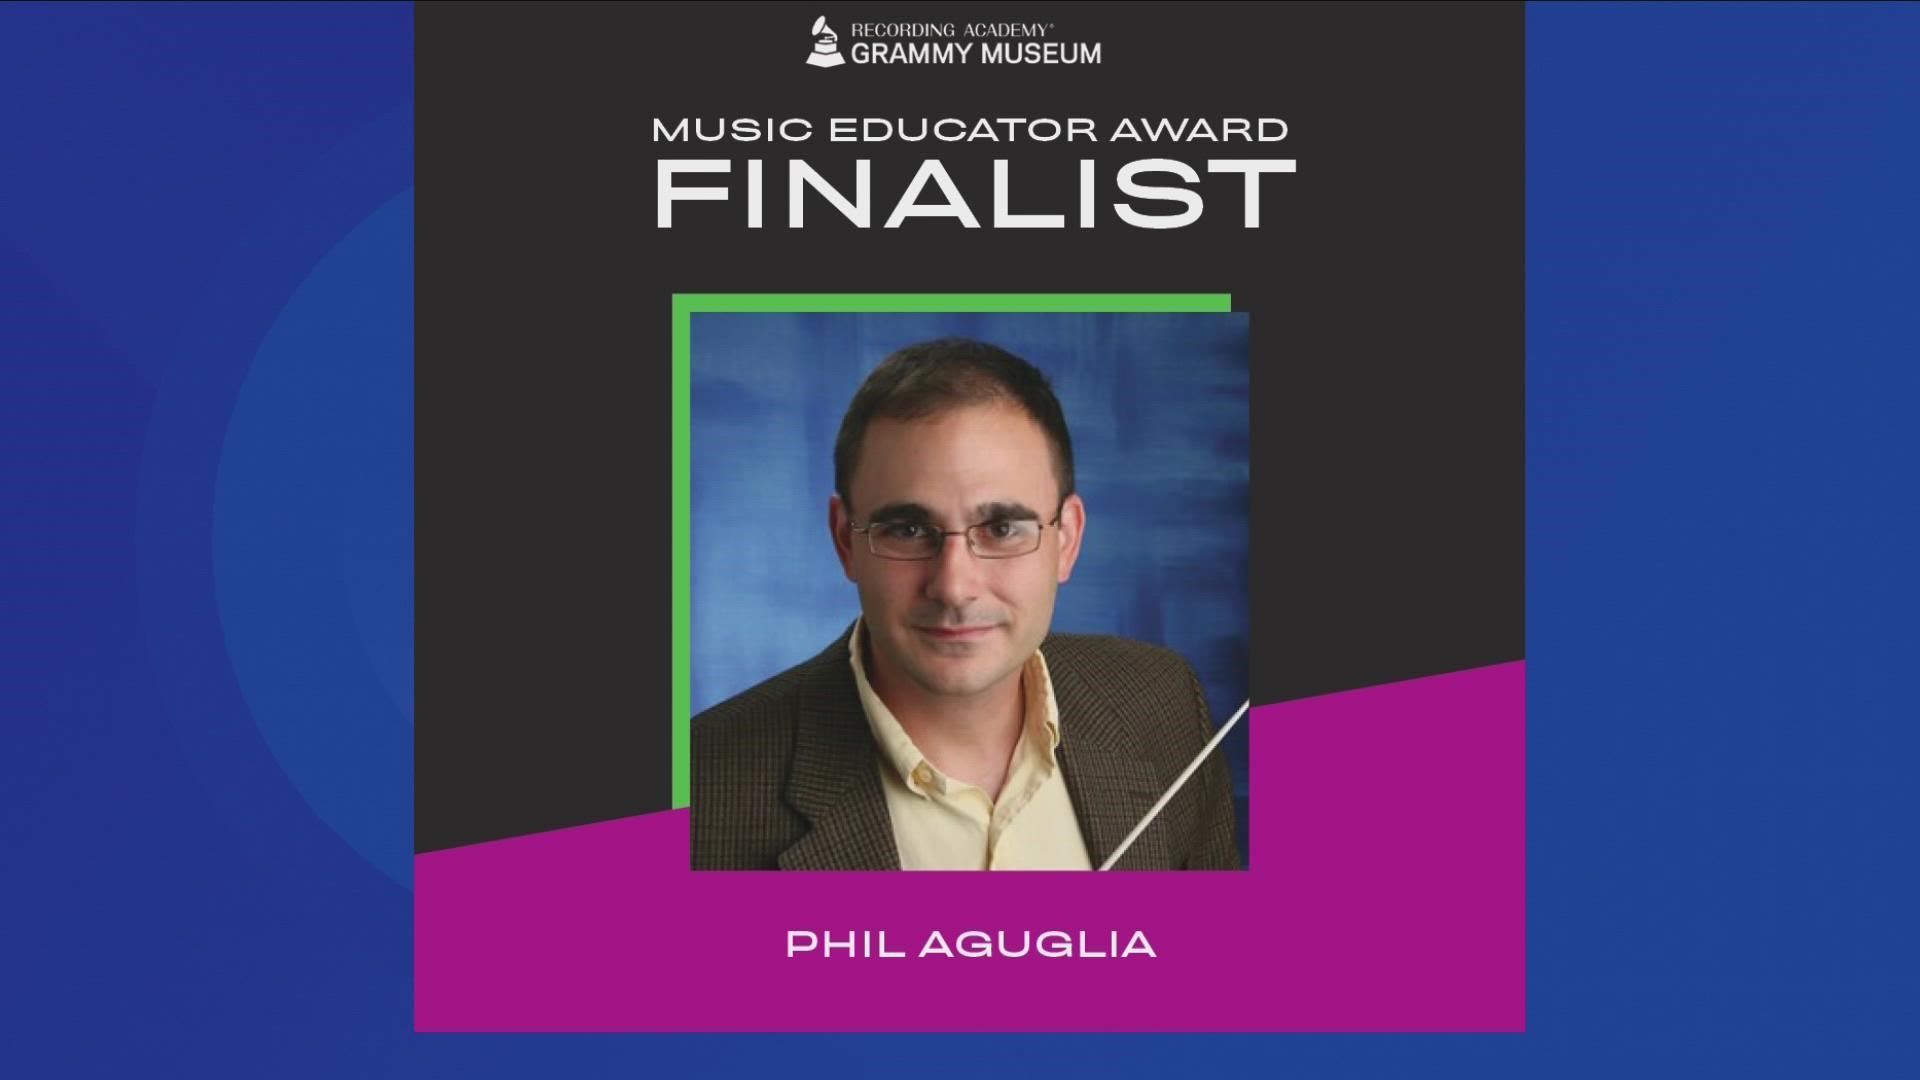 Kenmore East Band instructor Phil Aguglia he has been a quarterfinalist twice before... but this is his first time being named a finalist.